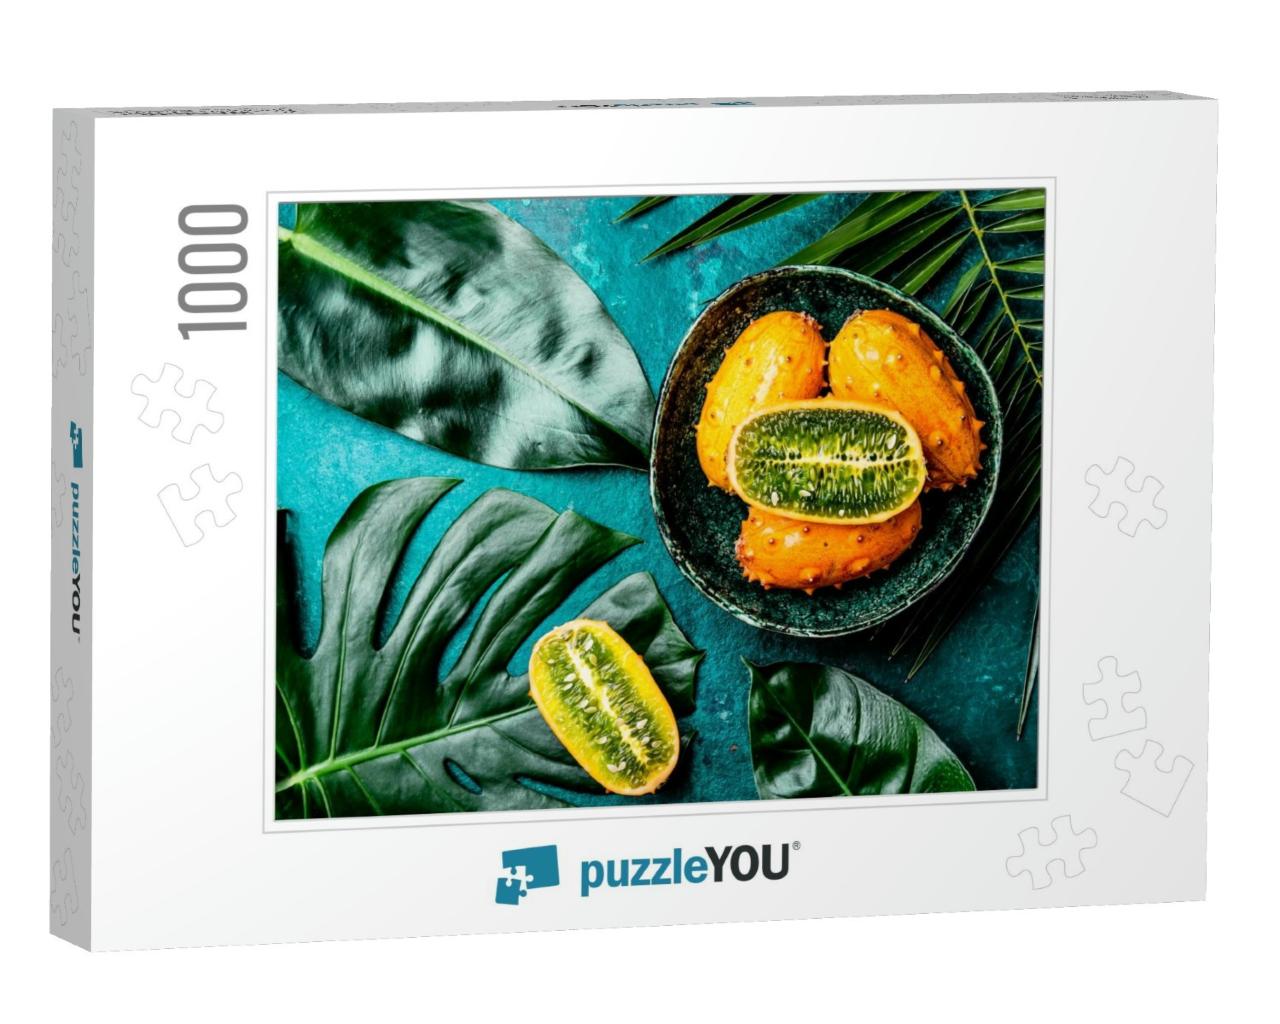 Tropical Fruit Kiwano Passion Fruit in Green Bowl on Turq... Jigsaw Puzzle with 1000 pieces